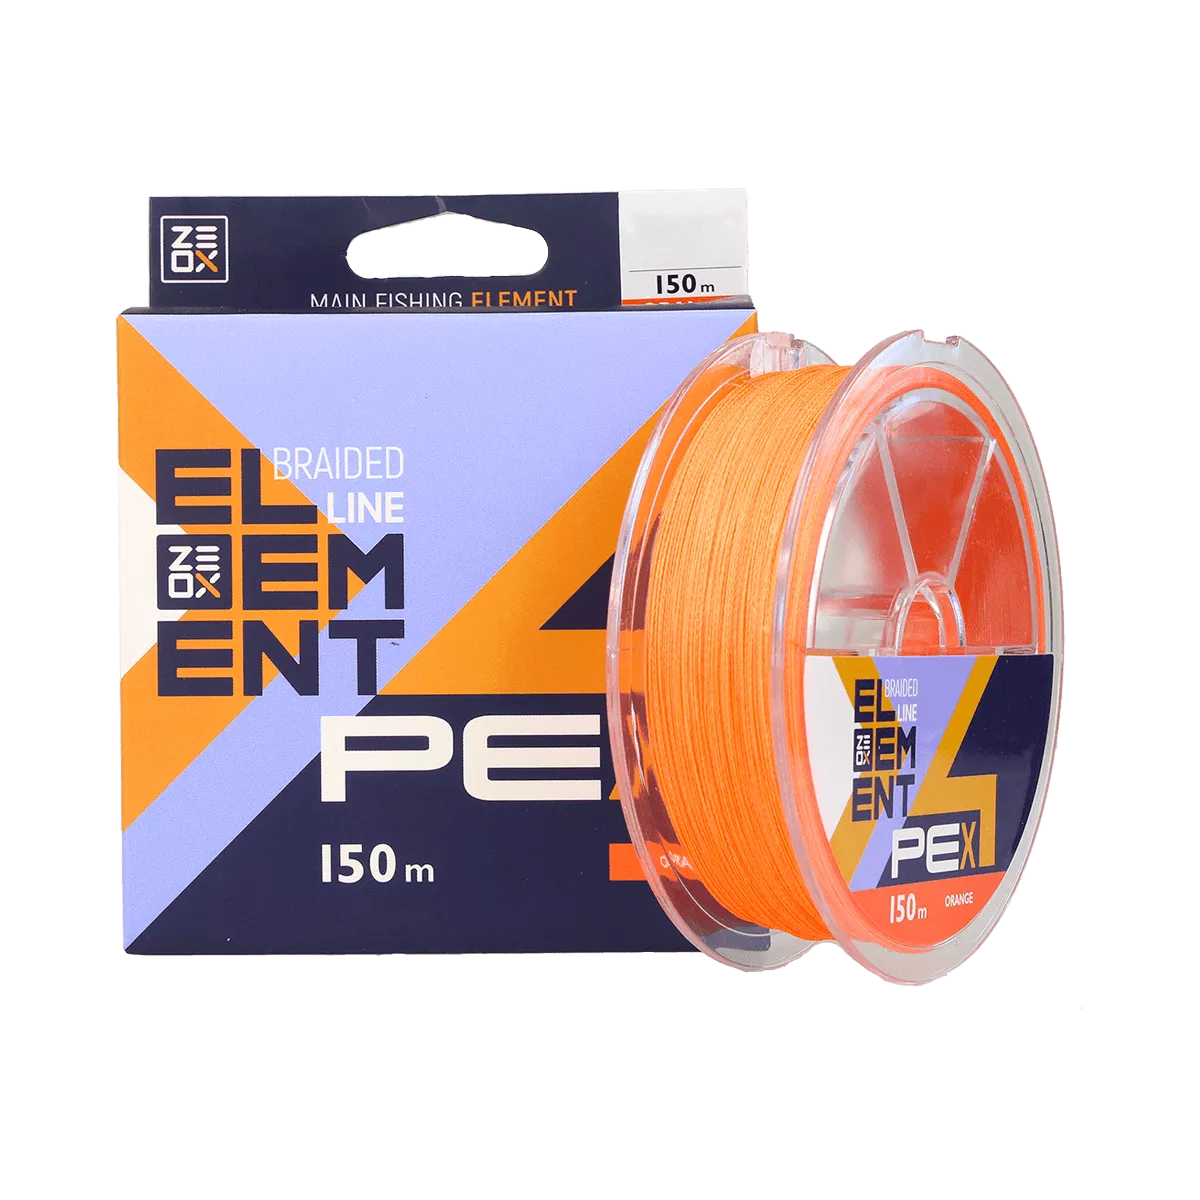 ZEOX Braided Line Element PE X4 150m Orange: check it out on the official  Golden Catch website!